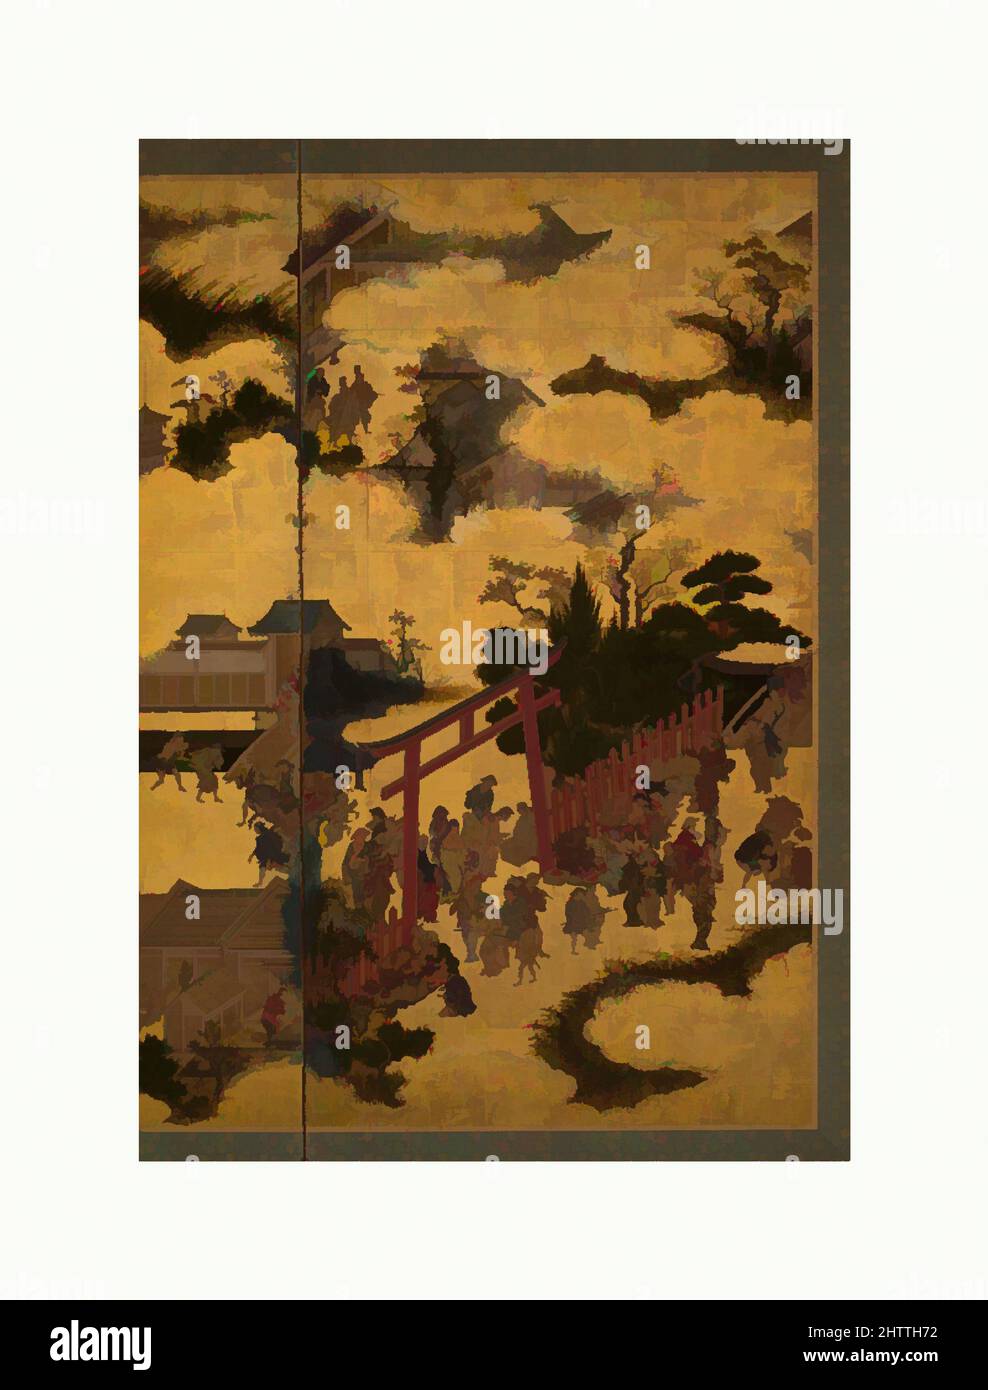 Art inspired by At the Shrine Gate, Edo period (1615–1868), 17th century, Japan, Two-panel folding screen; ink, color, and gold on paper, 60 x 64 1/4 in. (152.4 x 163.2 cm), Screens, This bird's-eye view of a Shinto shrine and its environs offers a lively scene of seventeenth-century, Classic works modernized by Artotop with a splash of modernity. Shapes, color and value, eye-catching visual impact on art. Emotions through freedom of artworks in a contemporary way. A timeless message pursuing a wildly creative new direction. Artists turning to the digital medium and creating the Artotop NFT Stock Photo